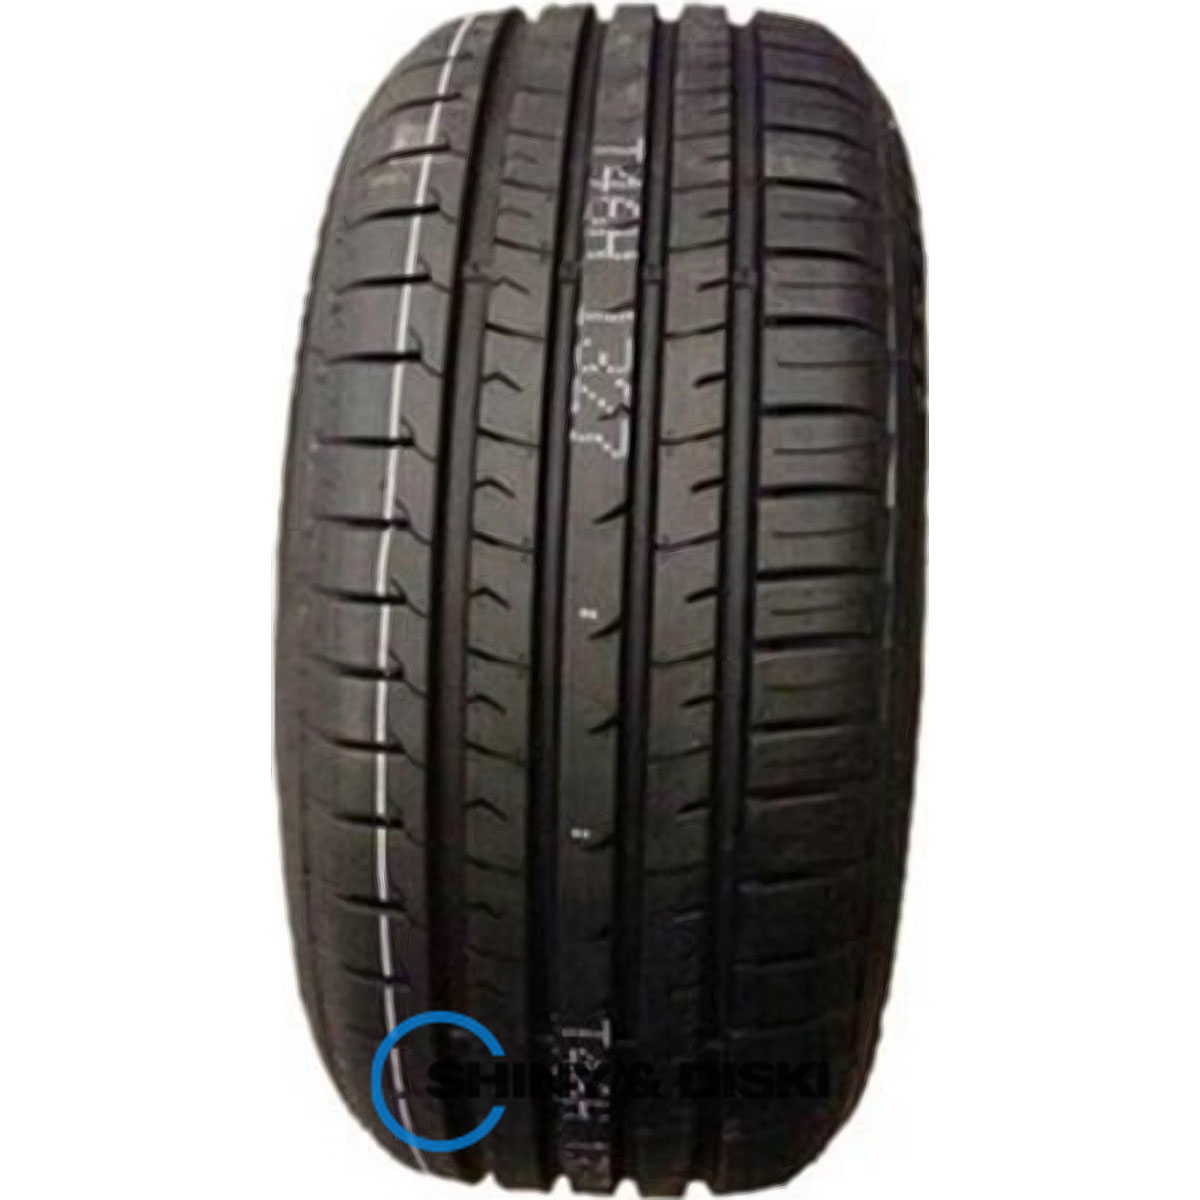 гума cachland ch-ht7006 235/60 r16 100h